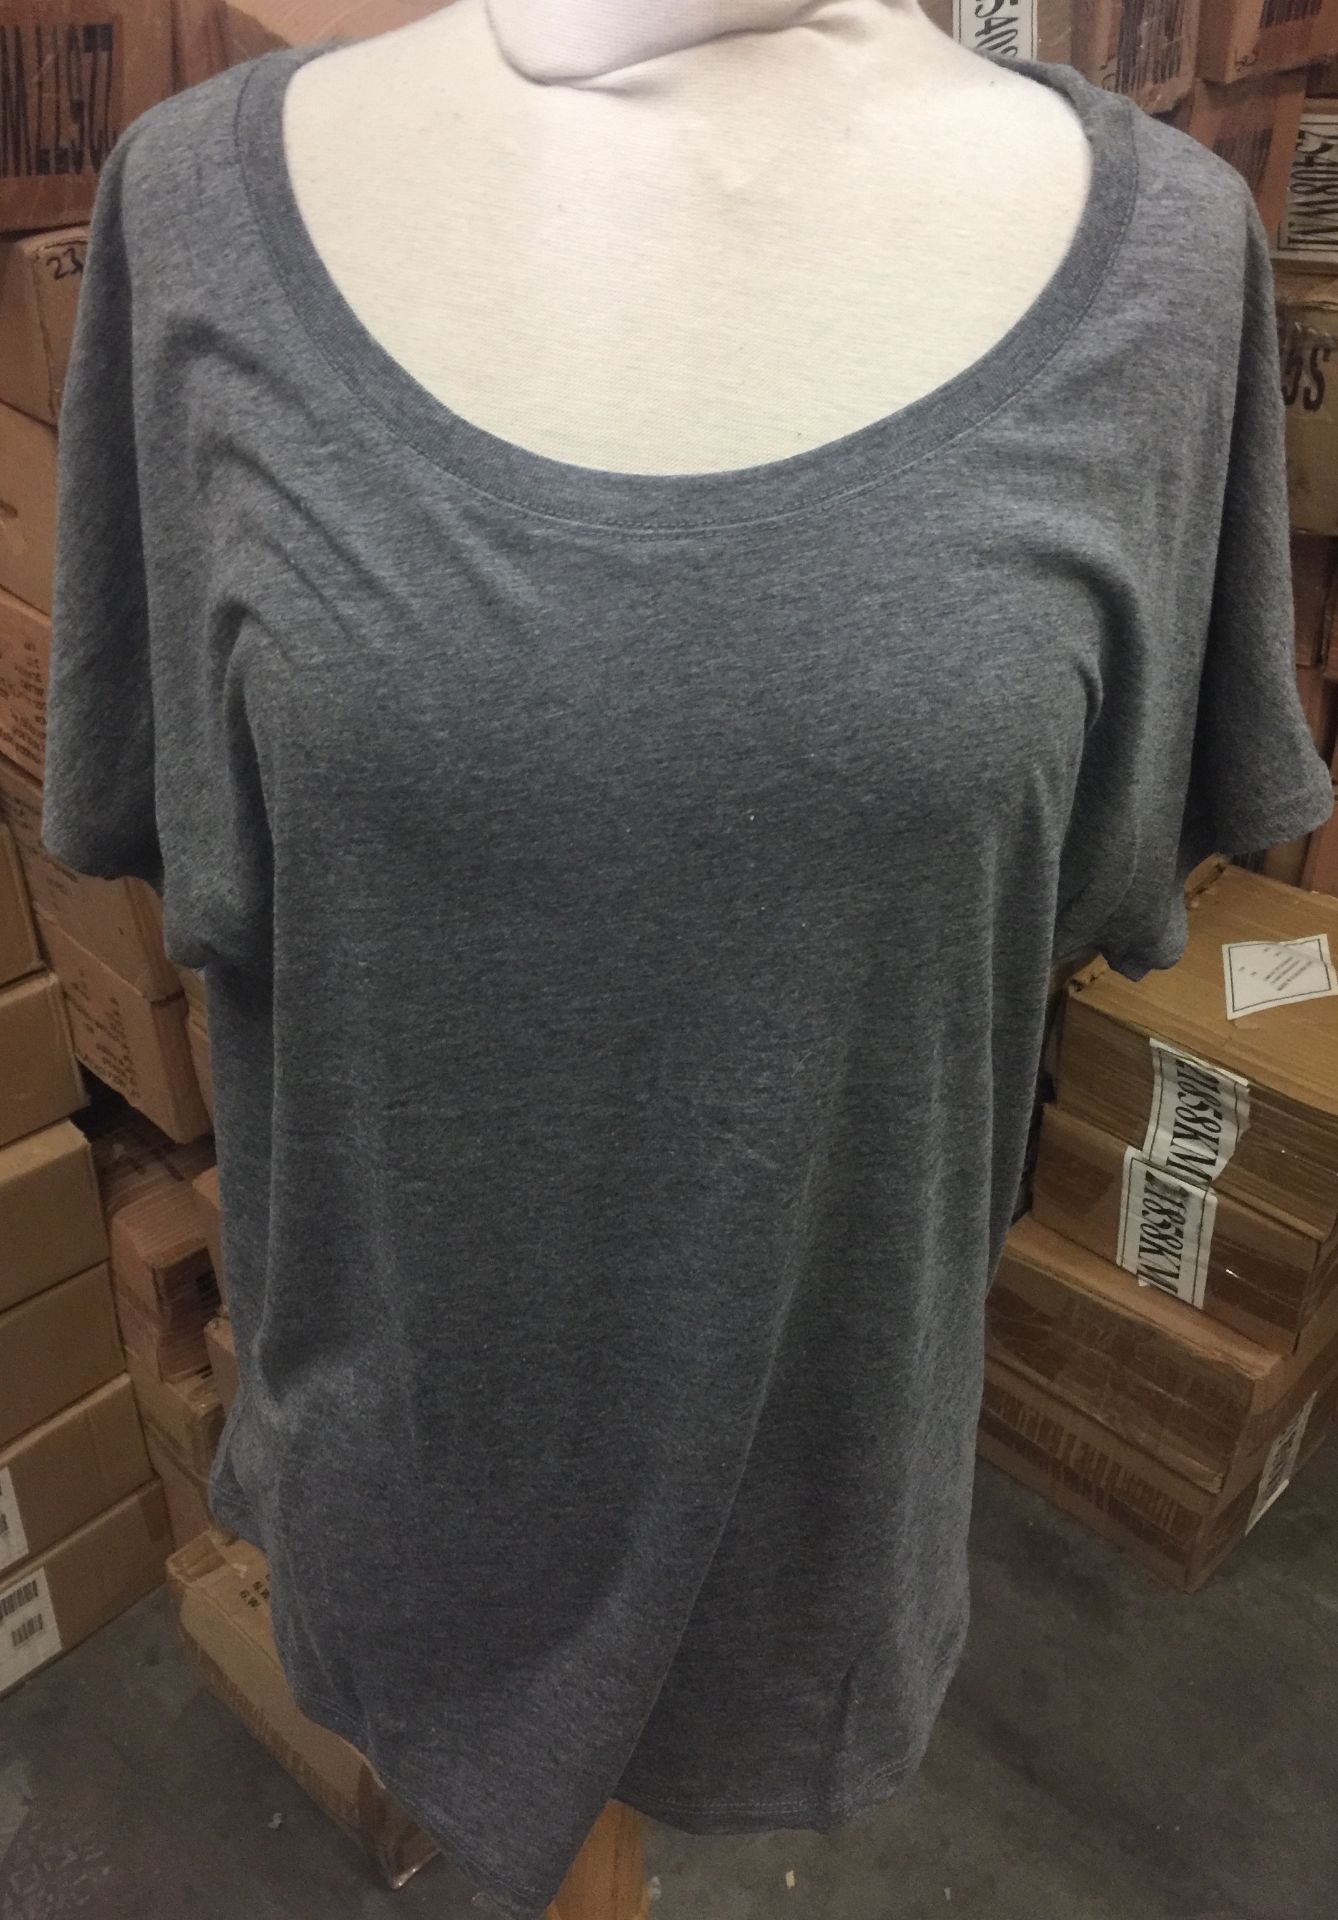 500 WOMENS T SHIRTS YOGA ATHLETIC STYLE FROM CLOSED STORE - Image 2 of 8